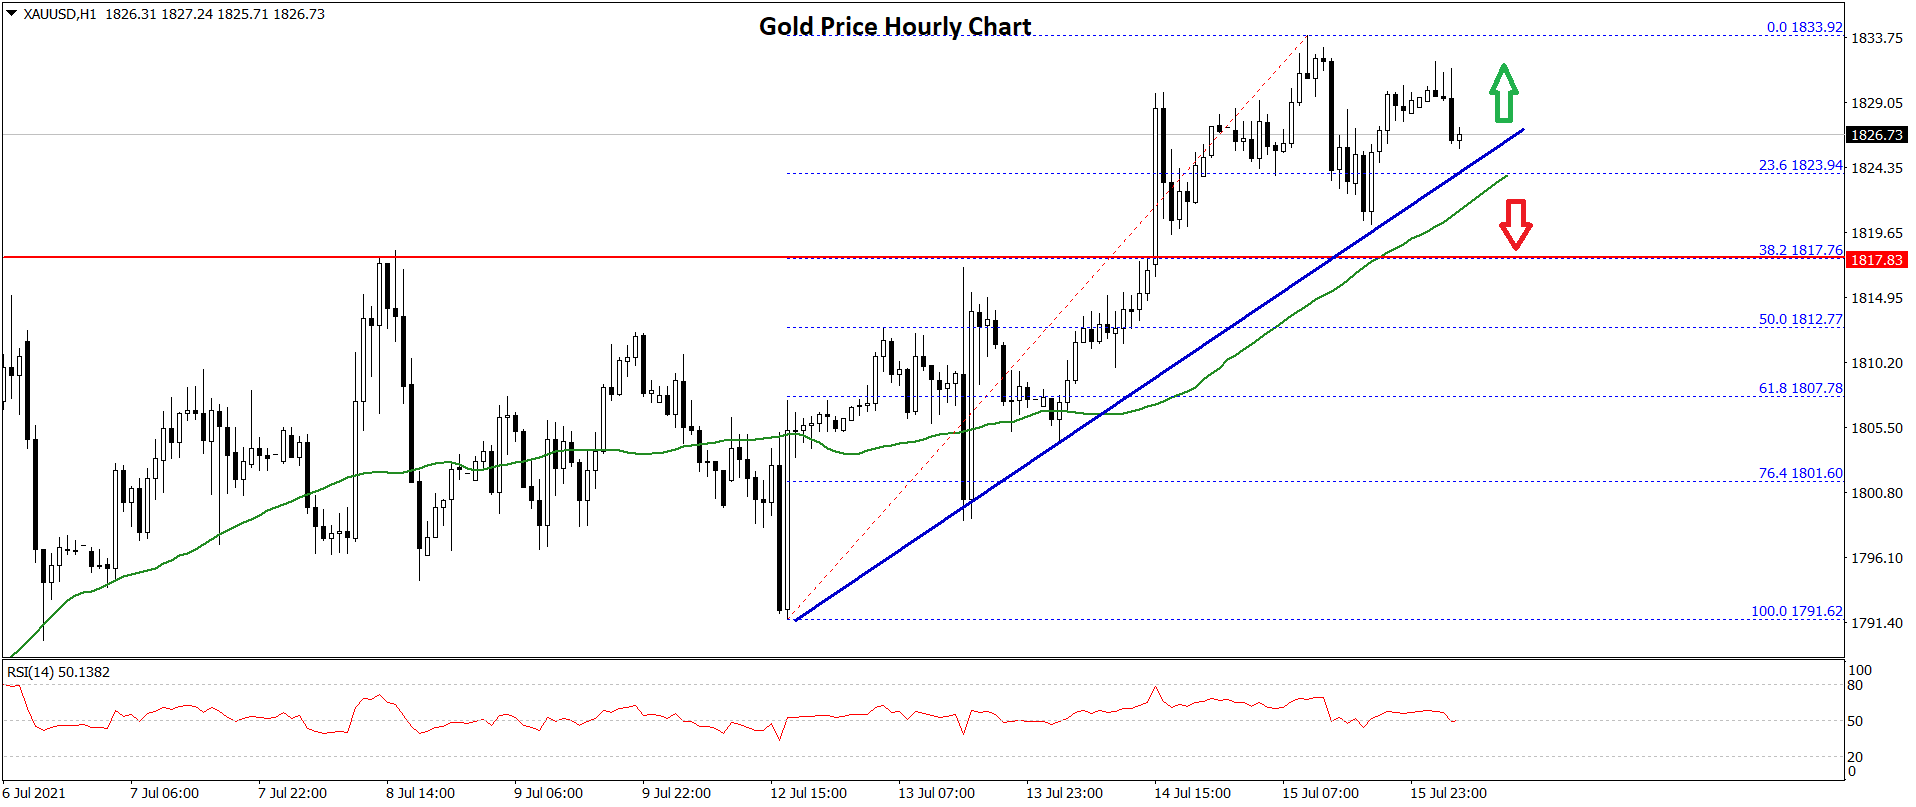 Gold Price Could Extend Gains While Crude Oil Price Corrects Lower